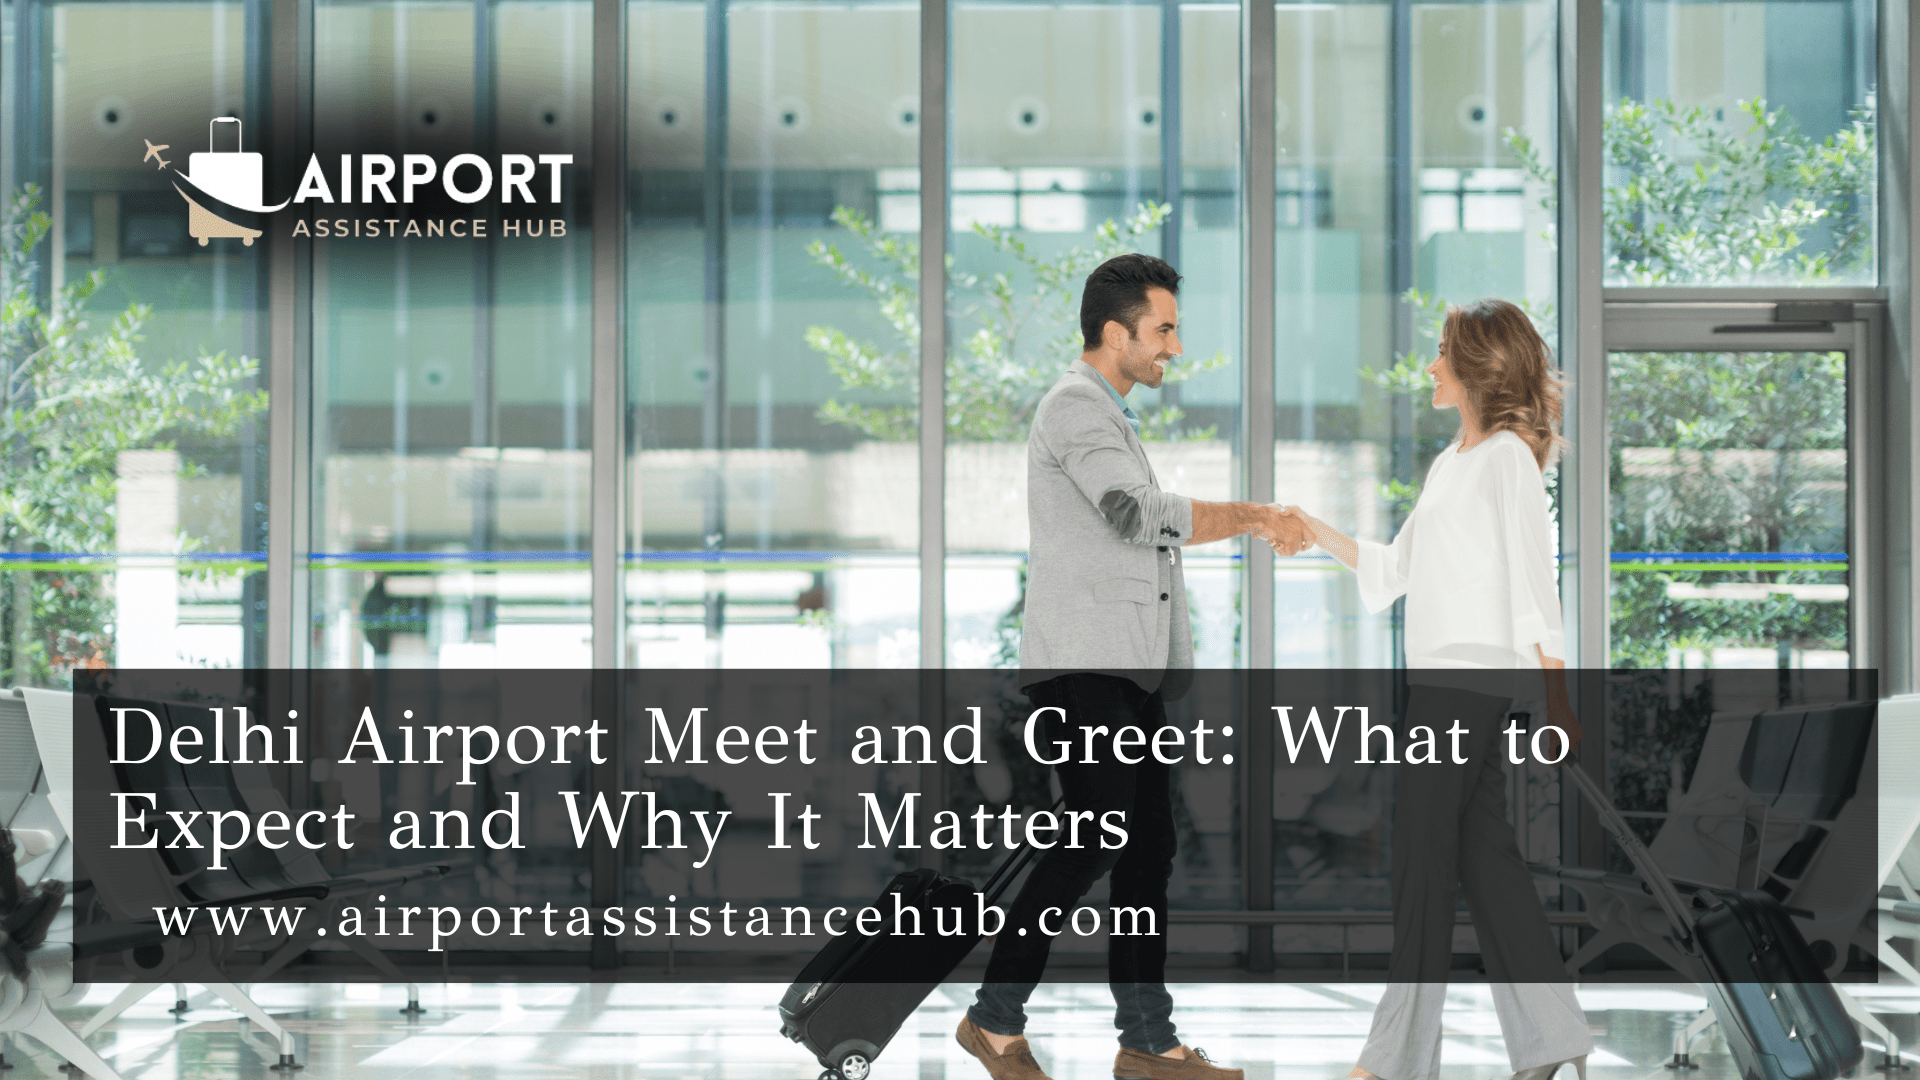 Delhi Airport Meet and Greet: What to Expect and Why It Matters